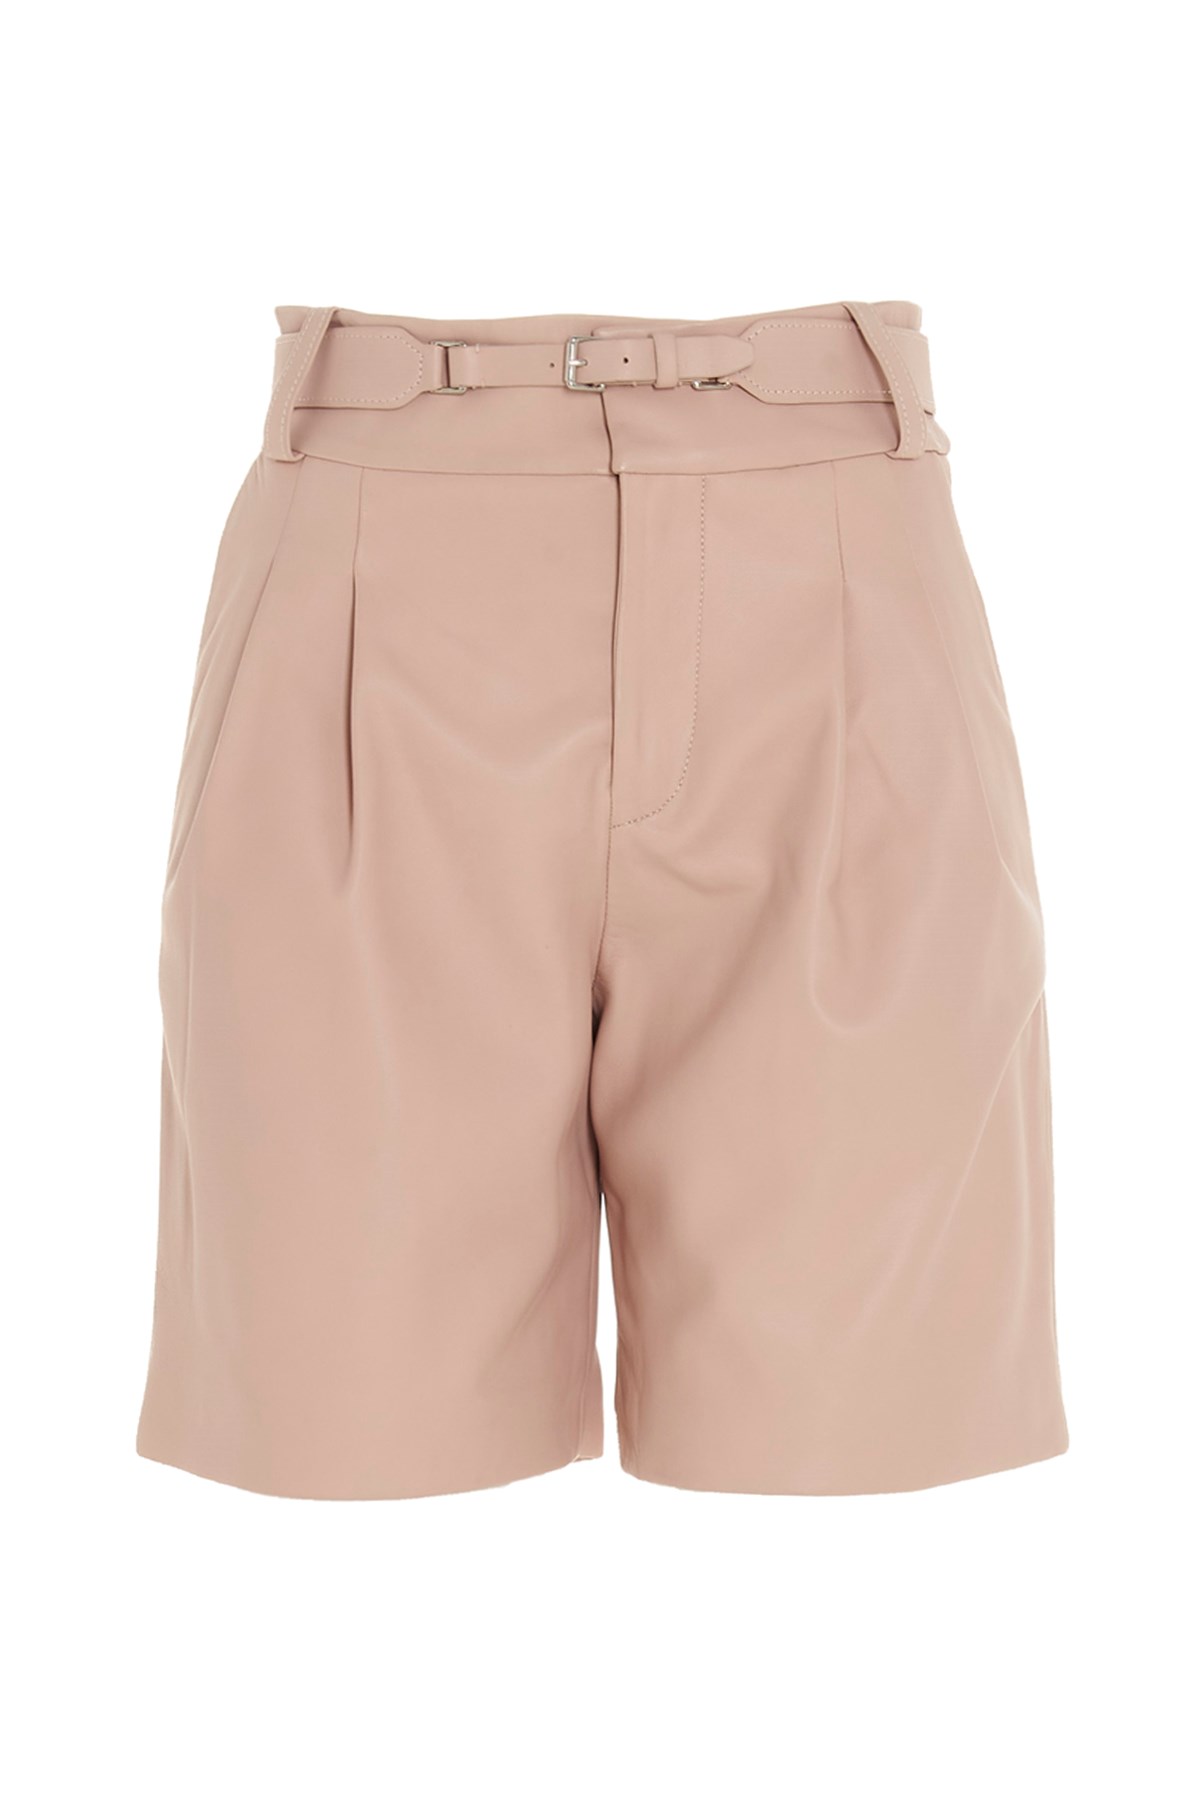 REDVALENTINO Belted Leather Shorts